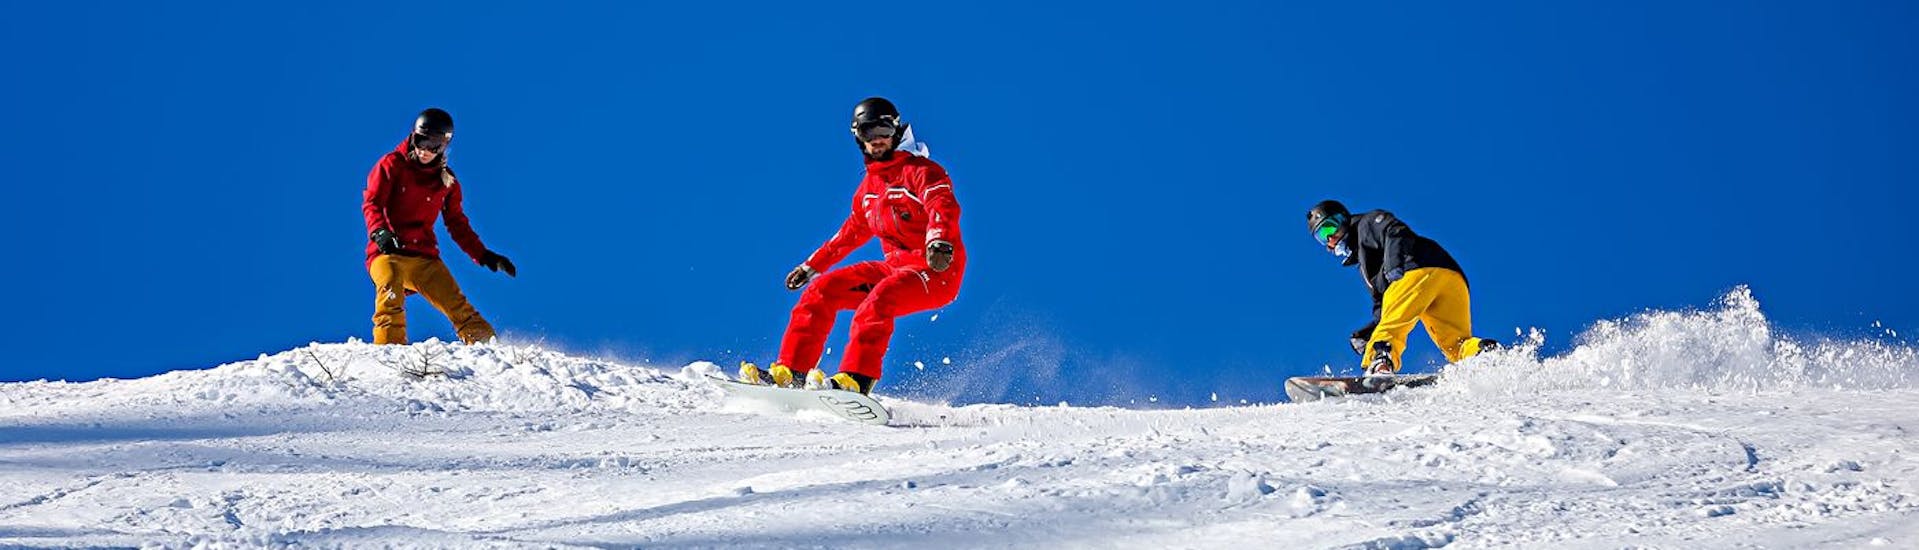 A snowboard instructor makes turns on the slopes during snowboarding lessons from 9 years old with the Ski School ESF Serre Chevalier - Villeneuve.